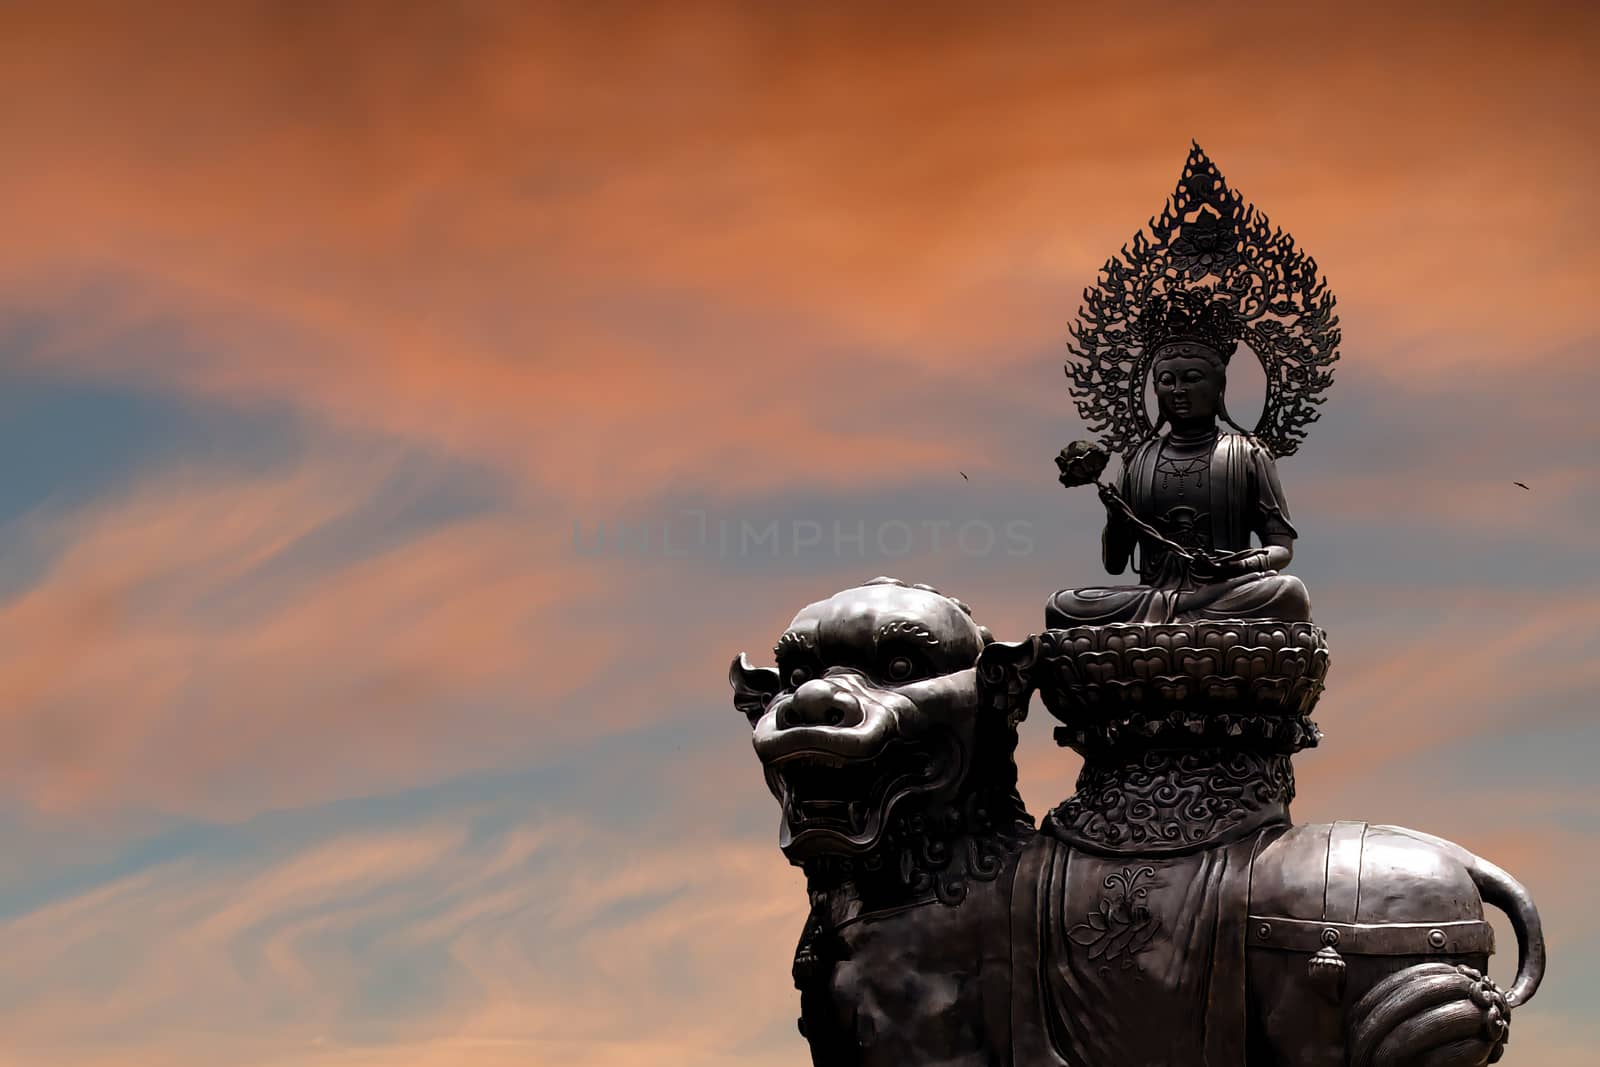 The silhouette of the Buddha statue against the sunset sky. by bonilook